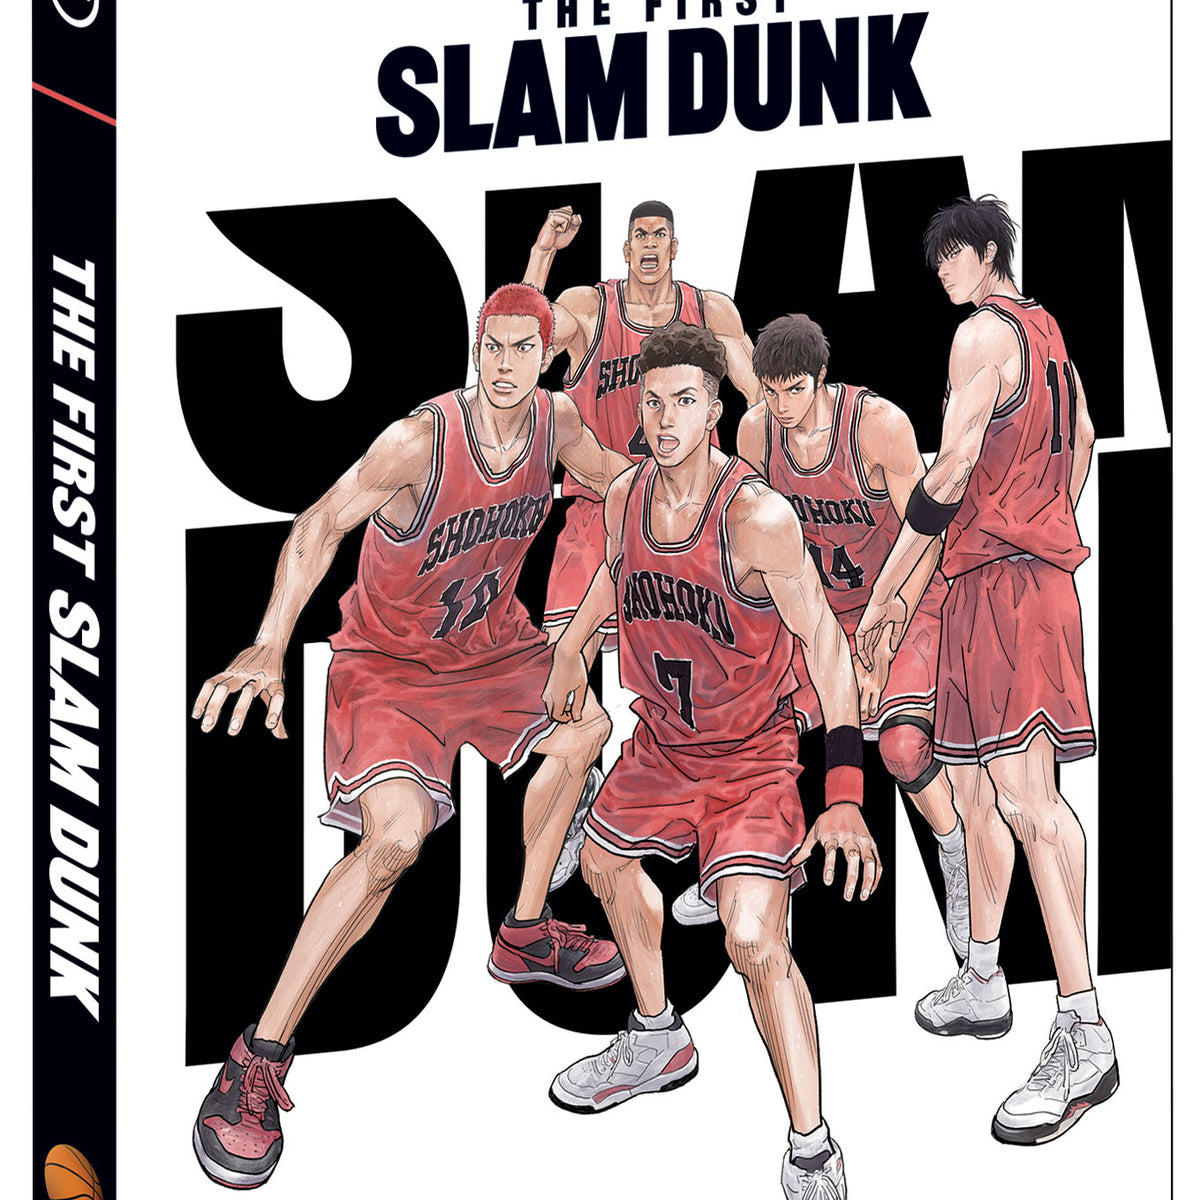 THE FIRST SLAM DUNK (Pre-Order: Ships 6/25)